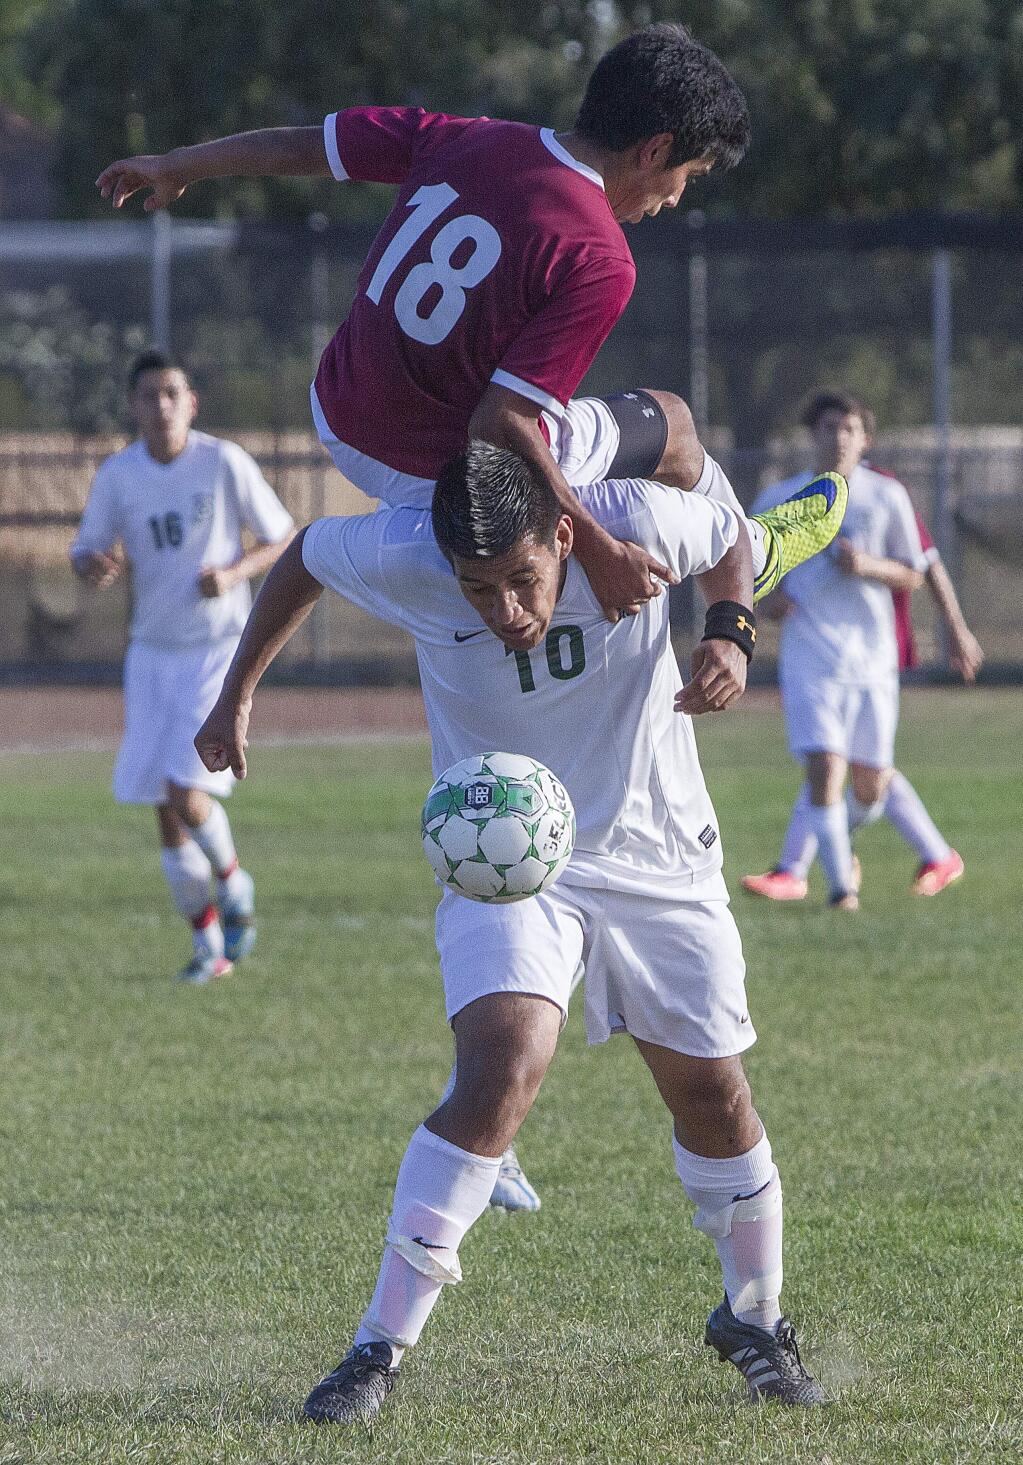 Robbi Pengelly's shot of a high-flying moment at a Sonoma Valley High School soccer match earned first place for 'best sports action photo.'